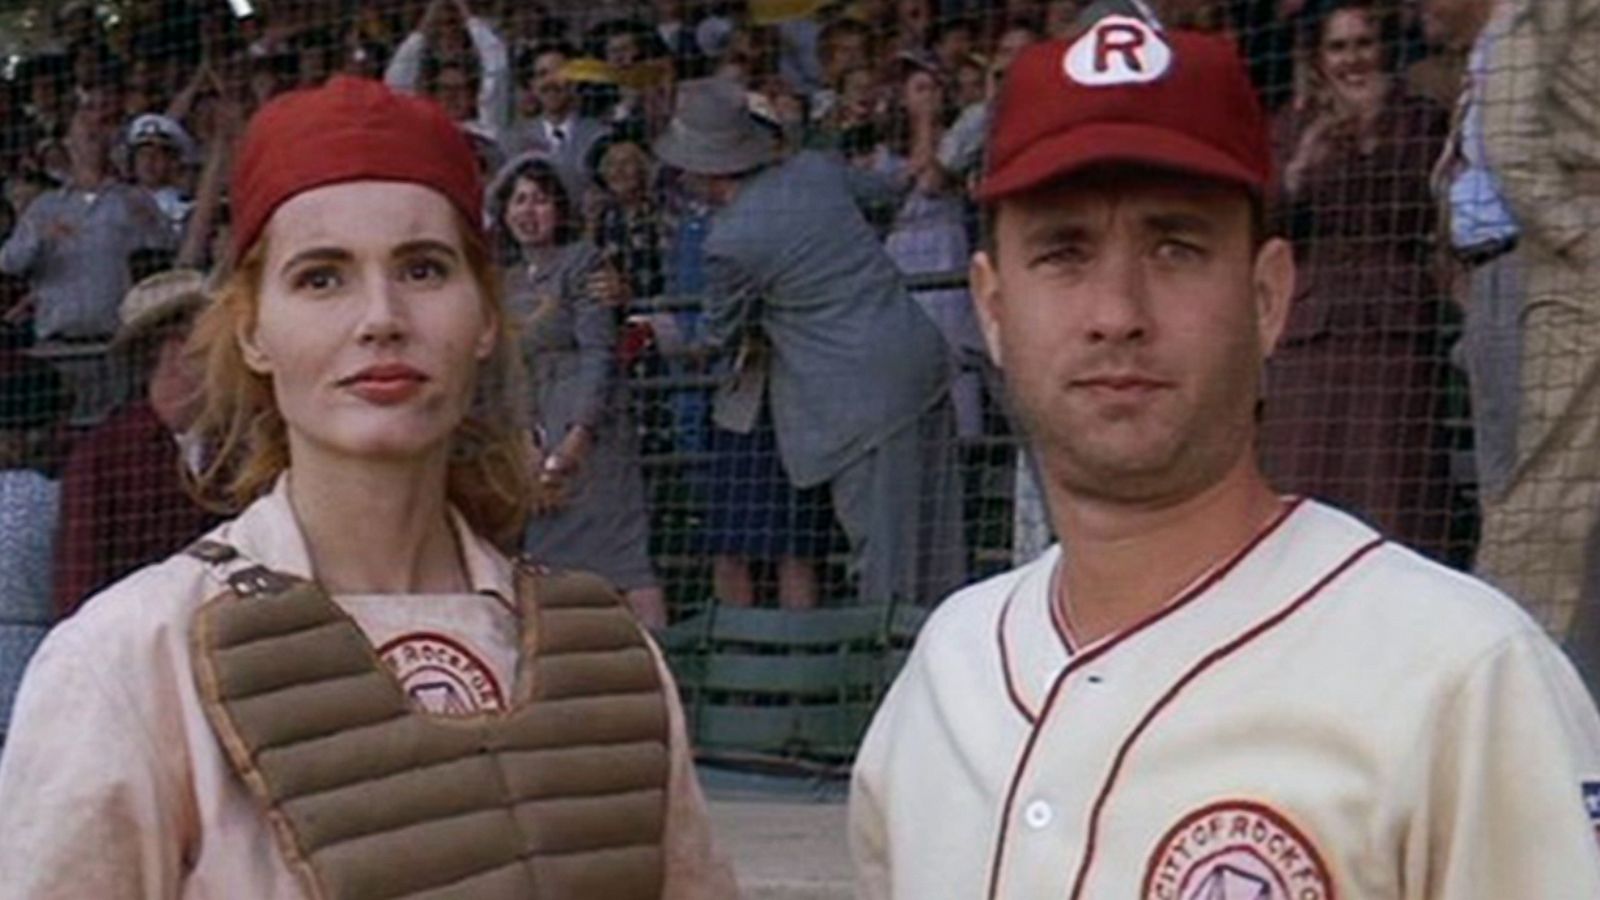 A League of Their Own': A real-life former player on what the film